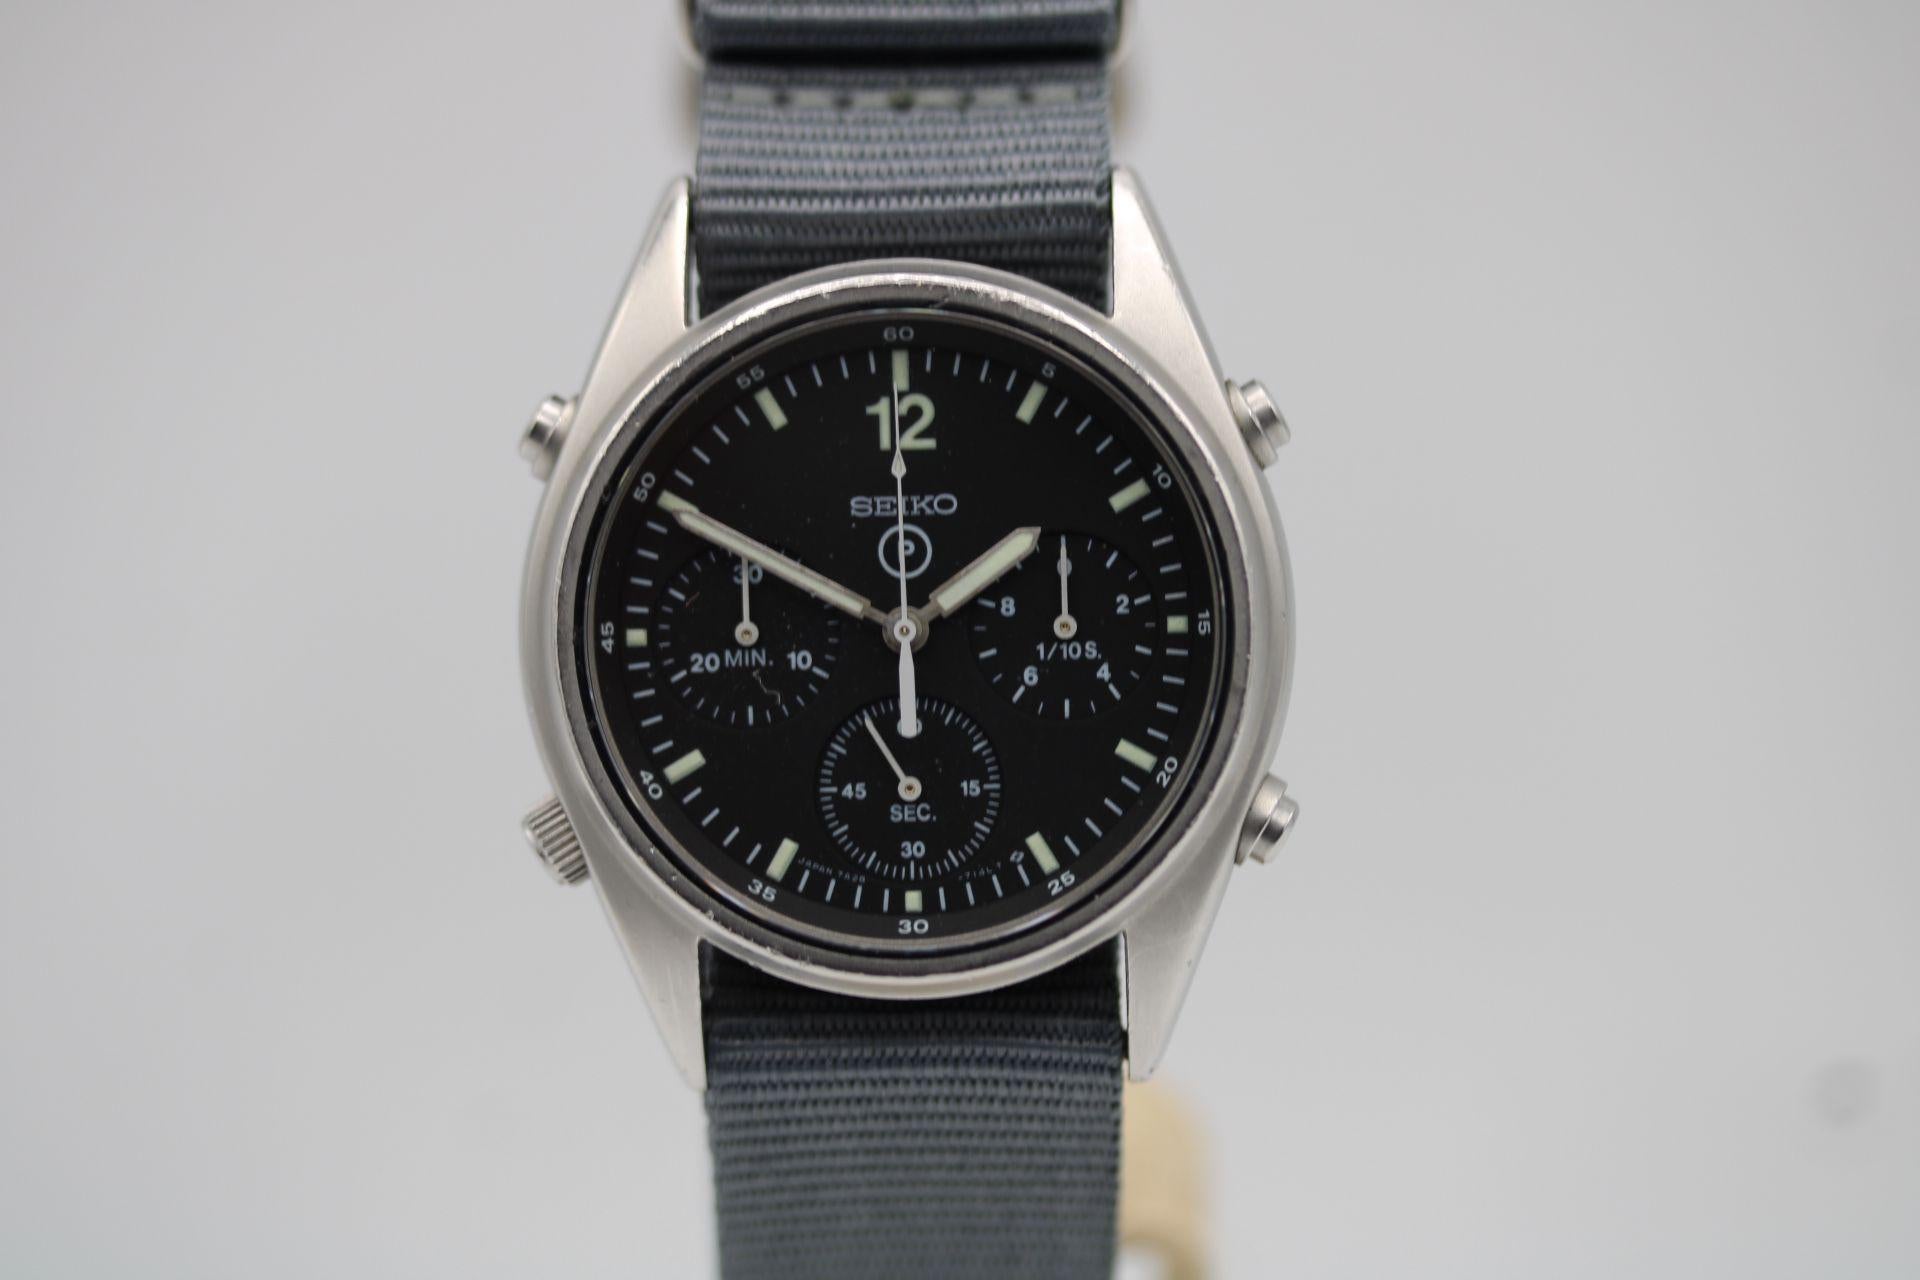  Seiko Generation 1 7A28-7120 c.1988 Watch Only


Original, working Generation 1 Seiko Chronograph made for the British RAF in 1988. Having been used in service as a tool watch will show some signs of age and minor blemishes however all intact and